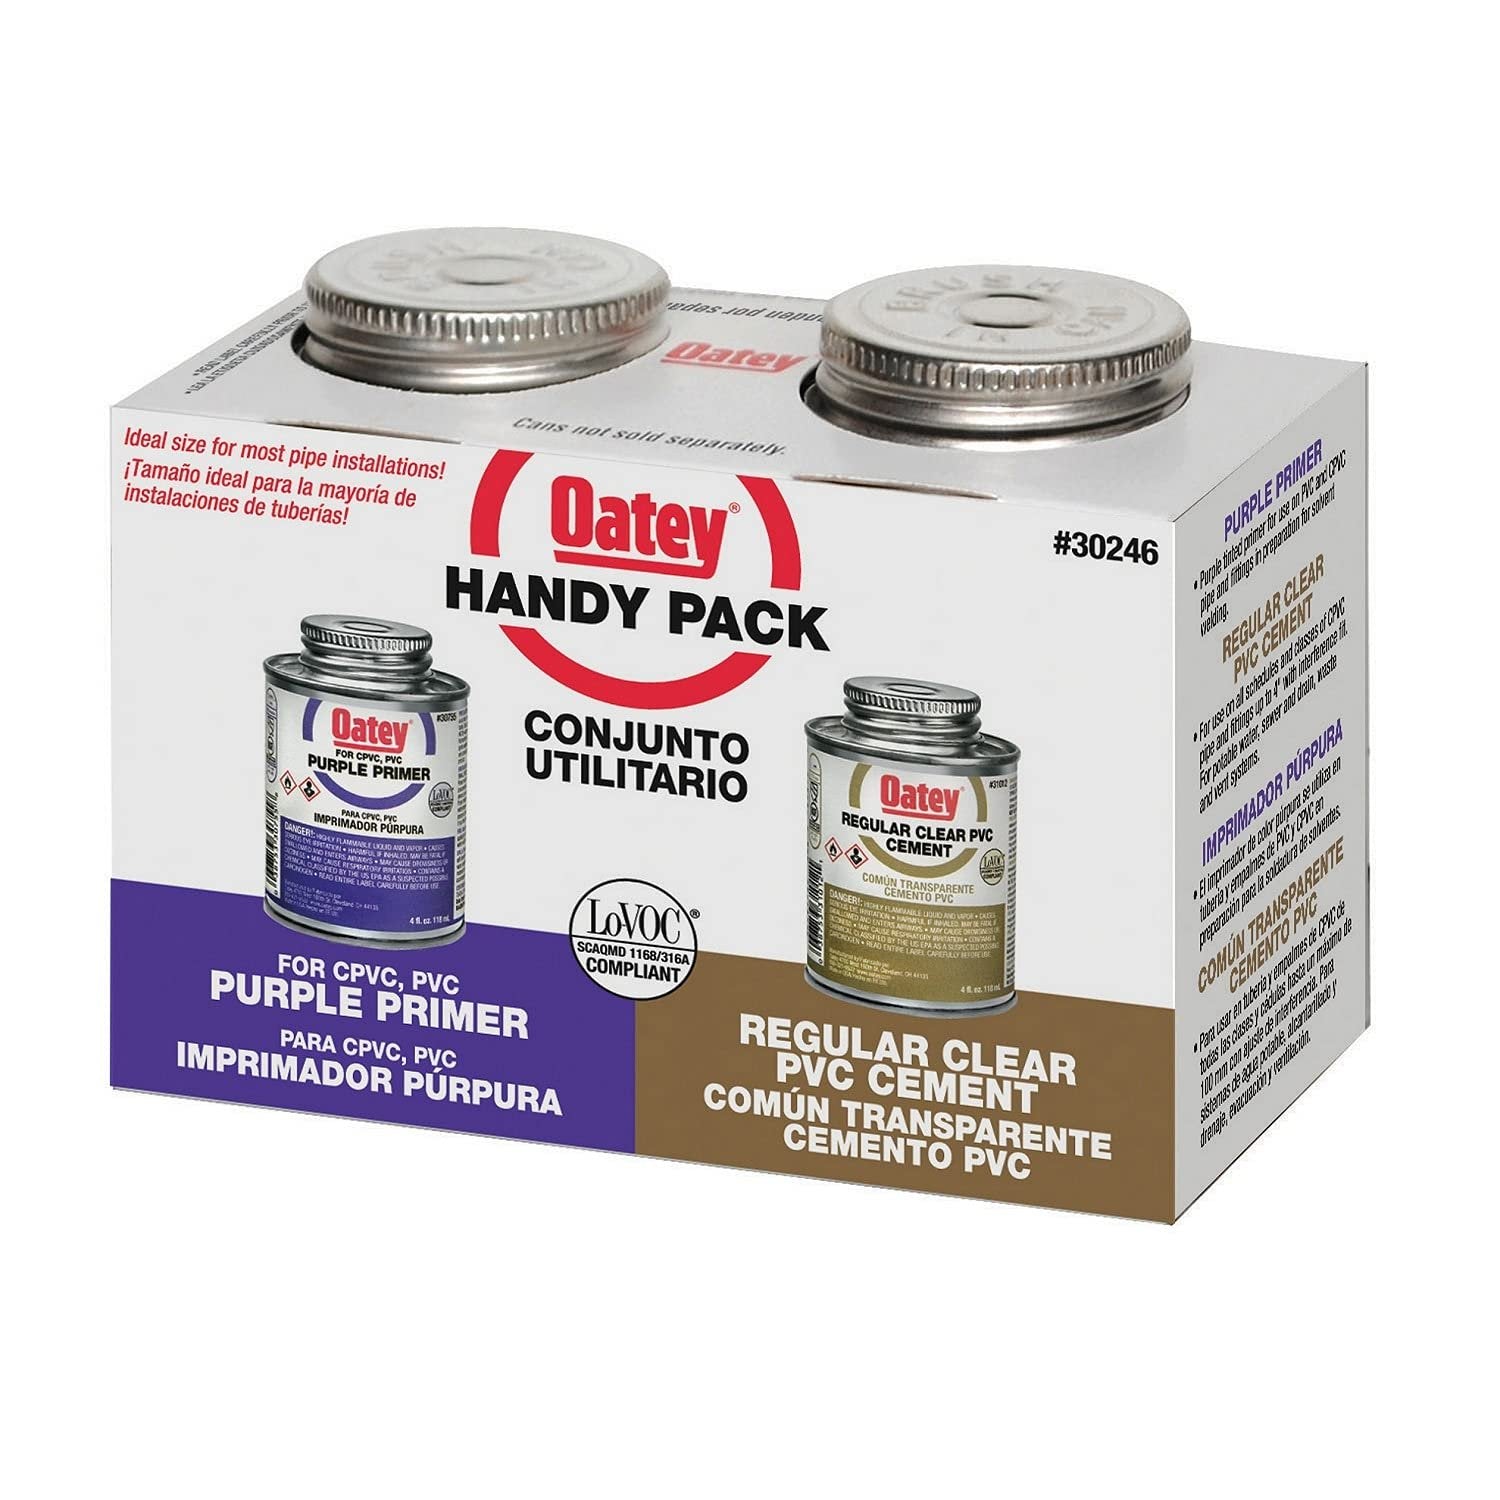 Oatey 30246 4 oz. PVC Regular Clear Cement and 4 oz. NSF Purple Primer Handy Pack